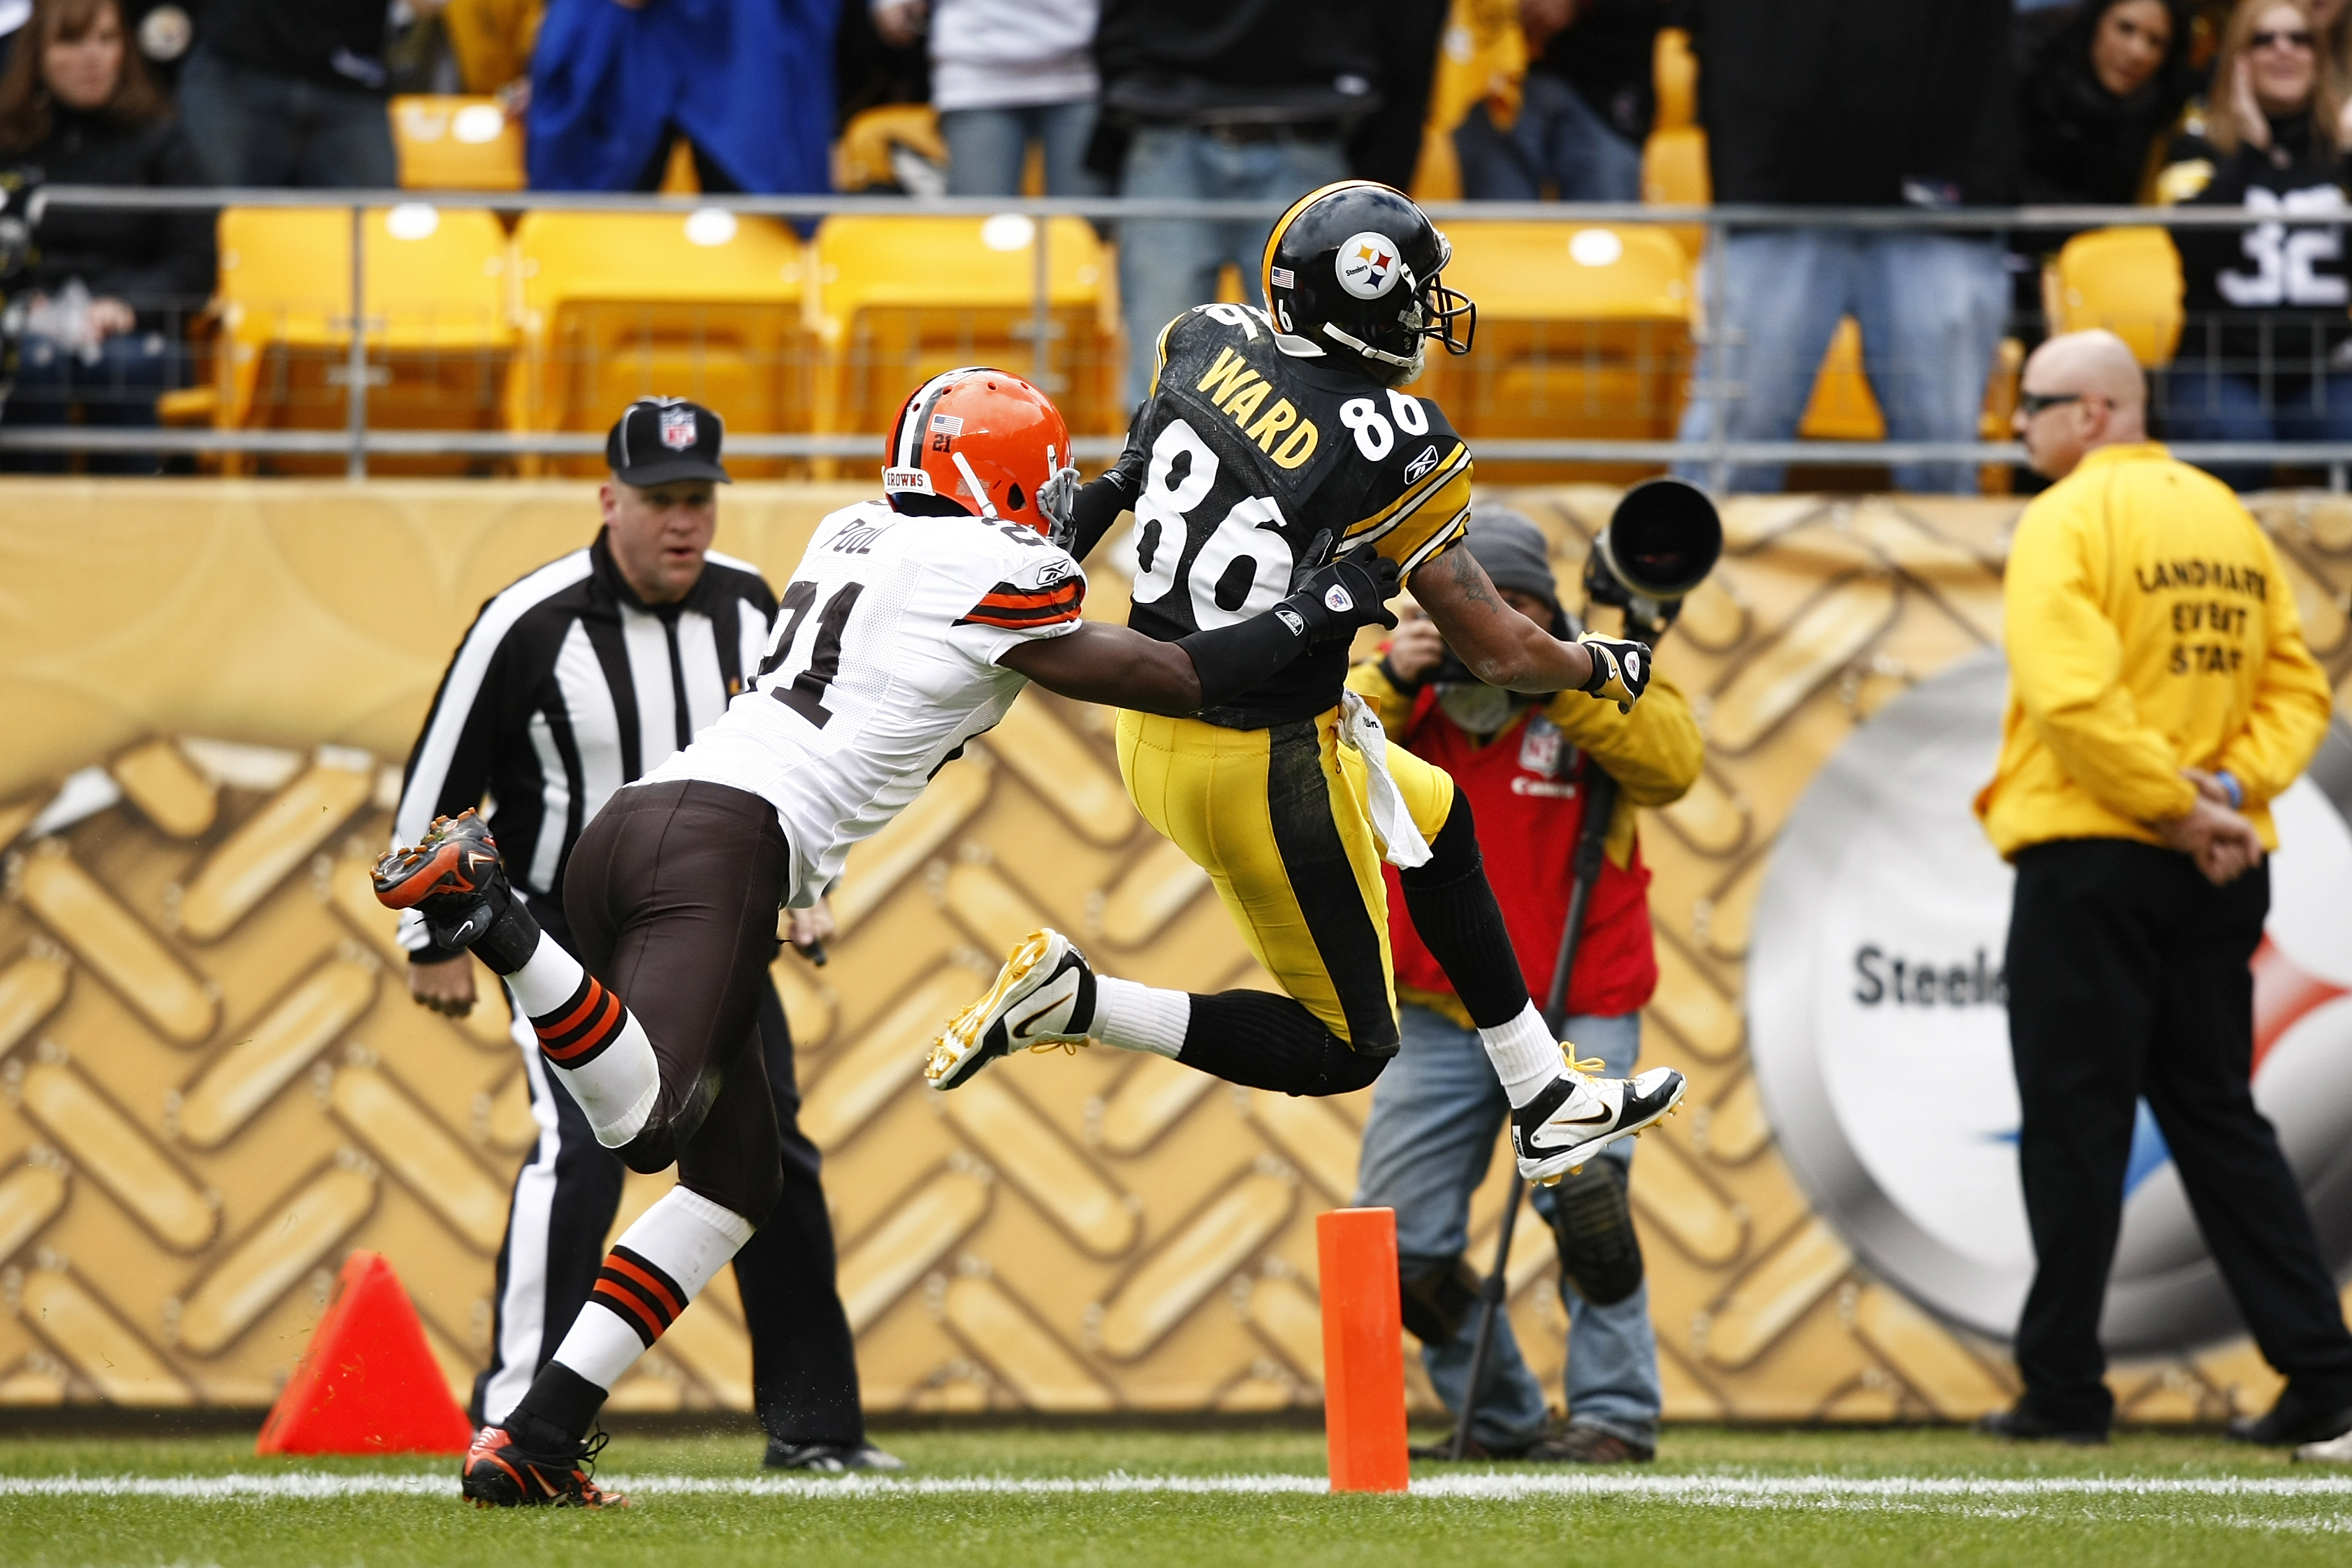 Browns Vs Steelers: Keys To Victory For Pitt in This AFC North